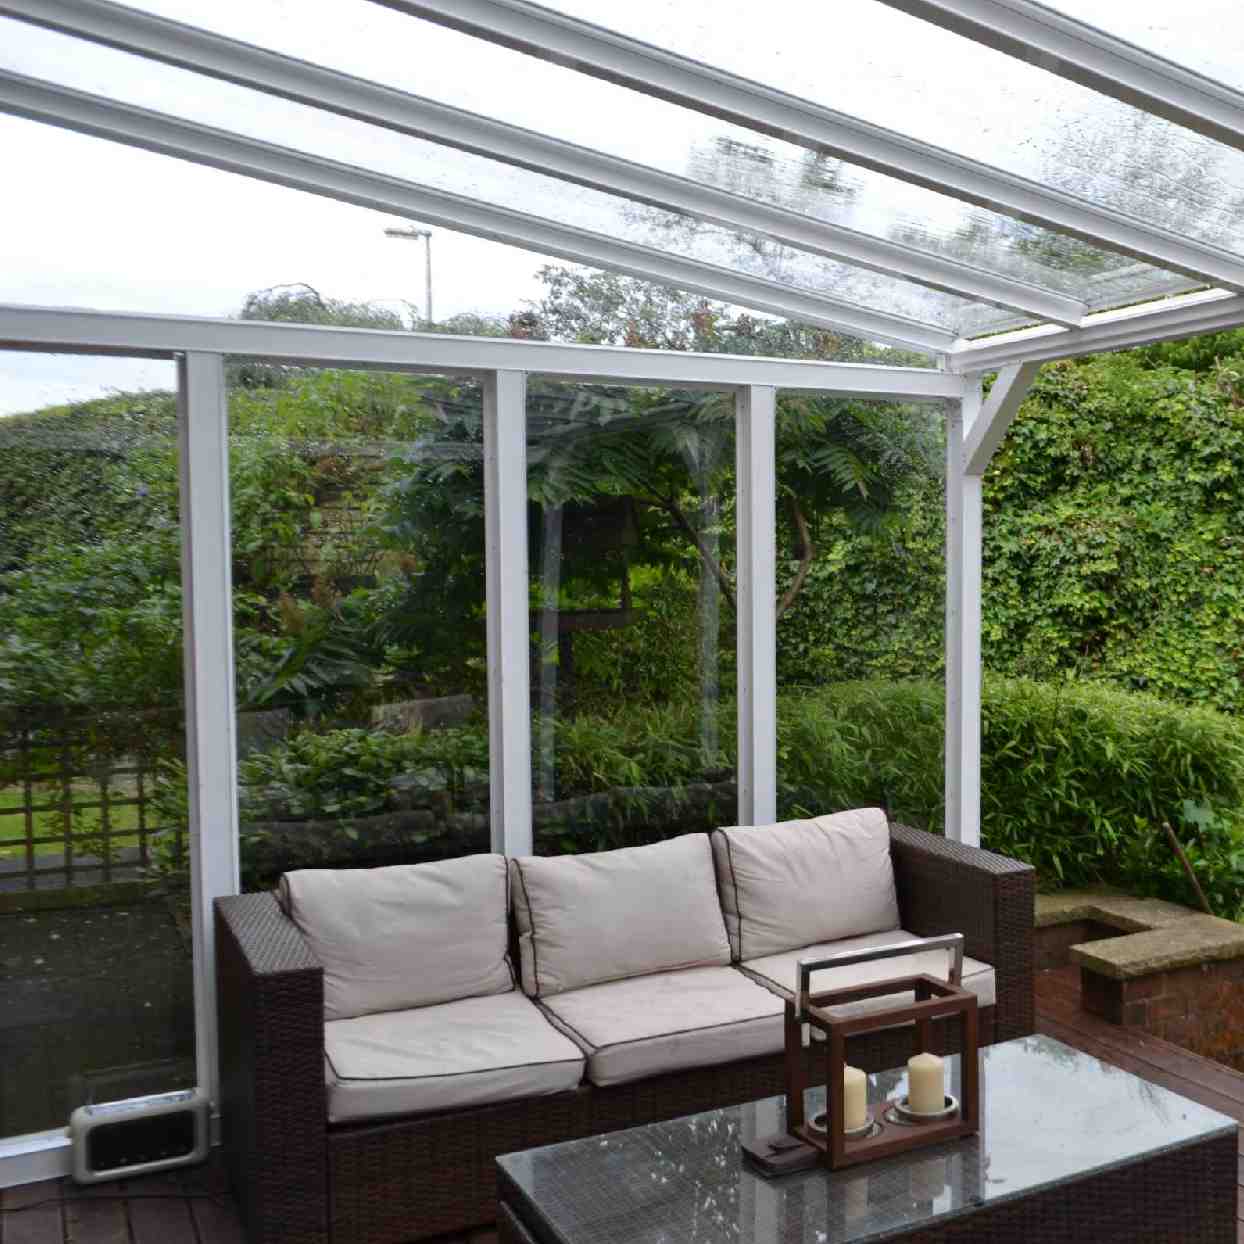 Buy Omega Verandah White with 6mm Glass Clear Plate Polycarbonate Glazing - 2.1m (W) x 3.0m (P), (2) Supporting Posts online today